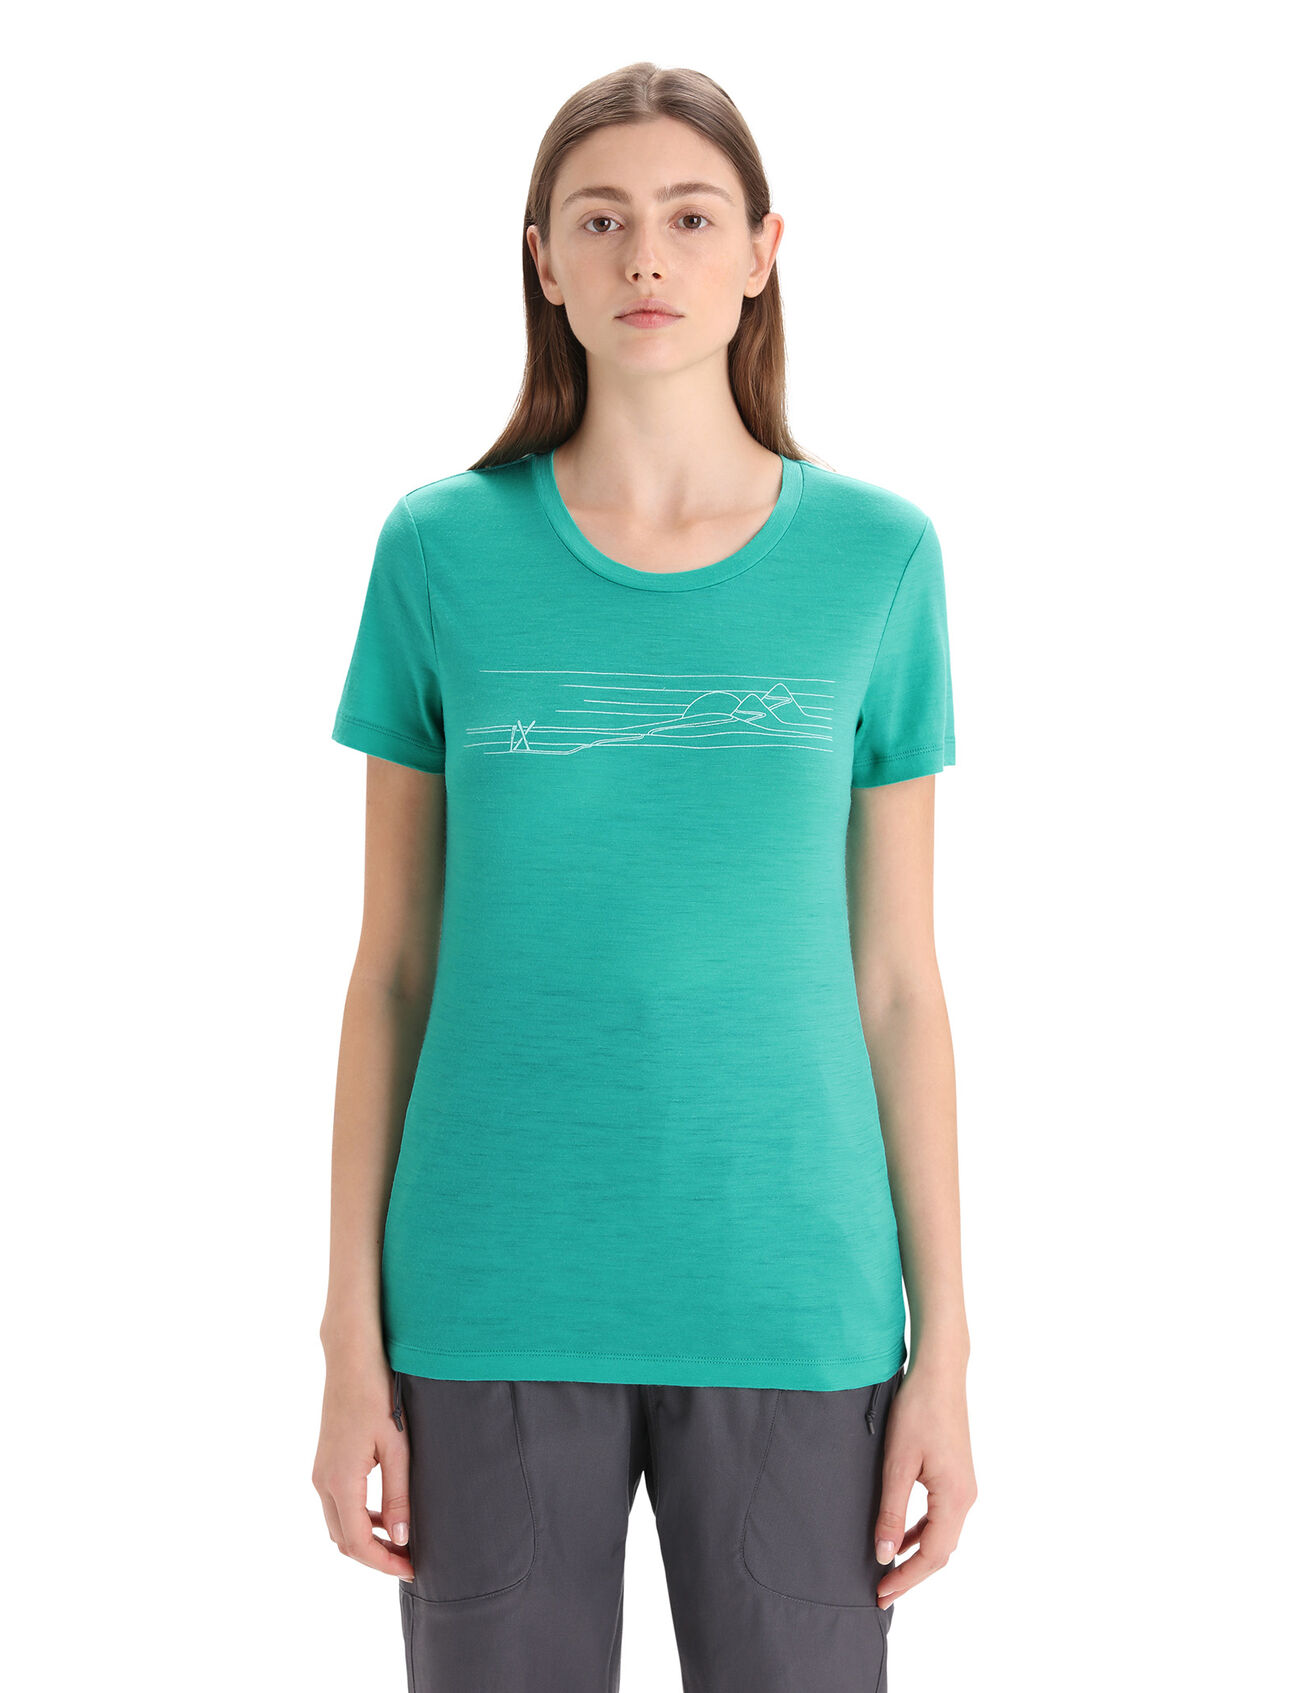 Womens Merino Tech Lite II Short Sleeve T-Shirt Ski Stripes Our versatile tech tee that provides comfort, breathability and natural odor-resistance for any adventure you can think of, the Tech Lite II Short Sleeve Tee Ski Stripes features 100% merino for all-natural performance. The tee’s original artwork by Damon Watters features a hand-drawn sketch of a dreamy backcountry ski run.